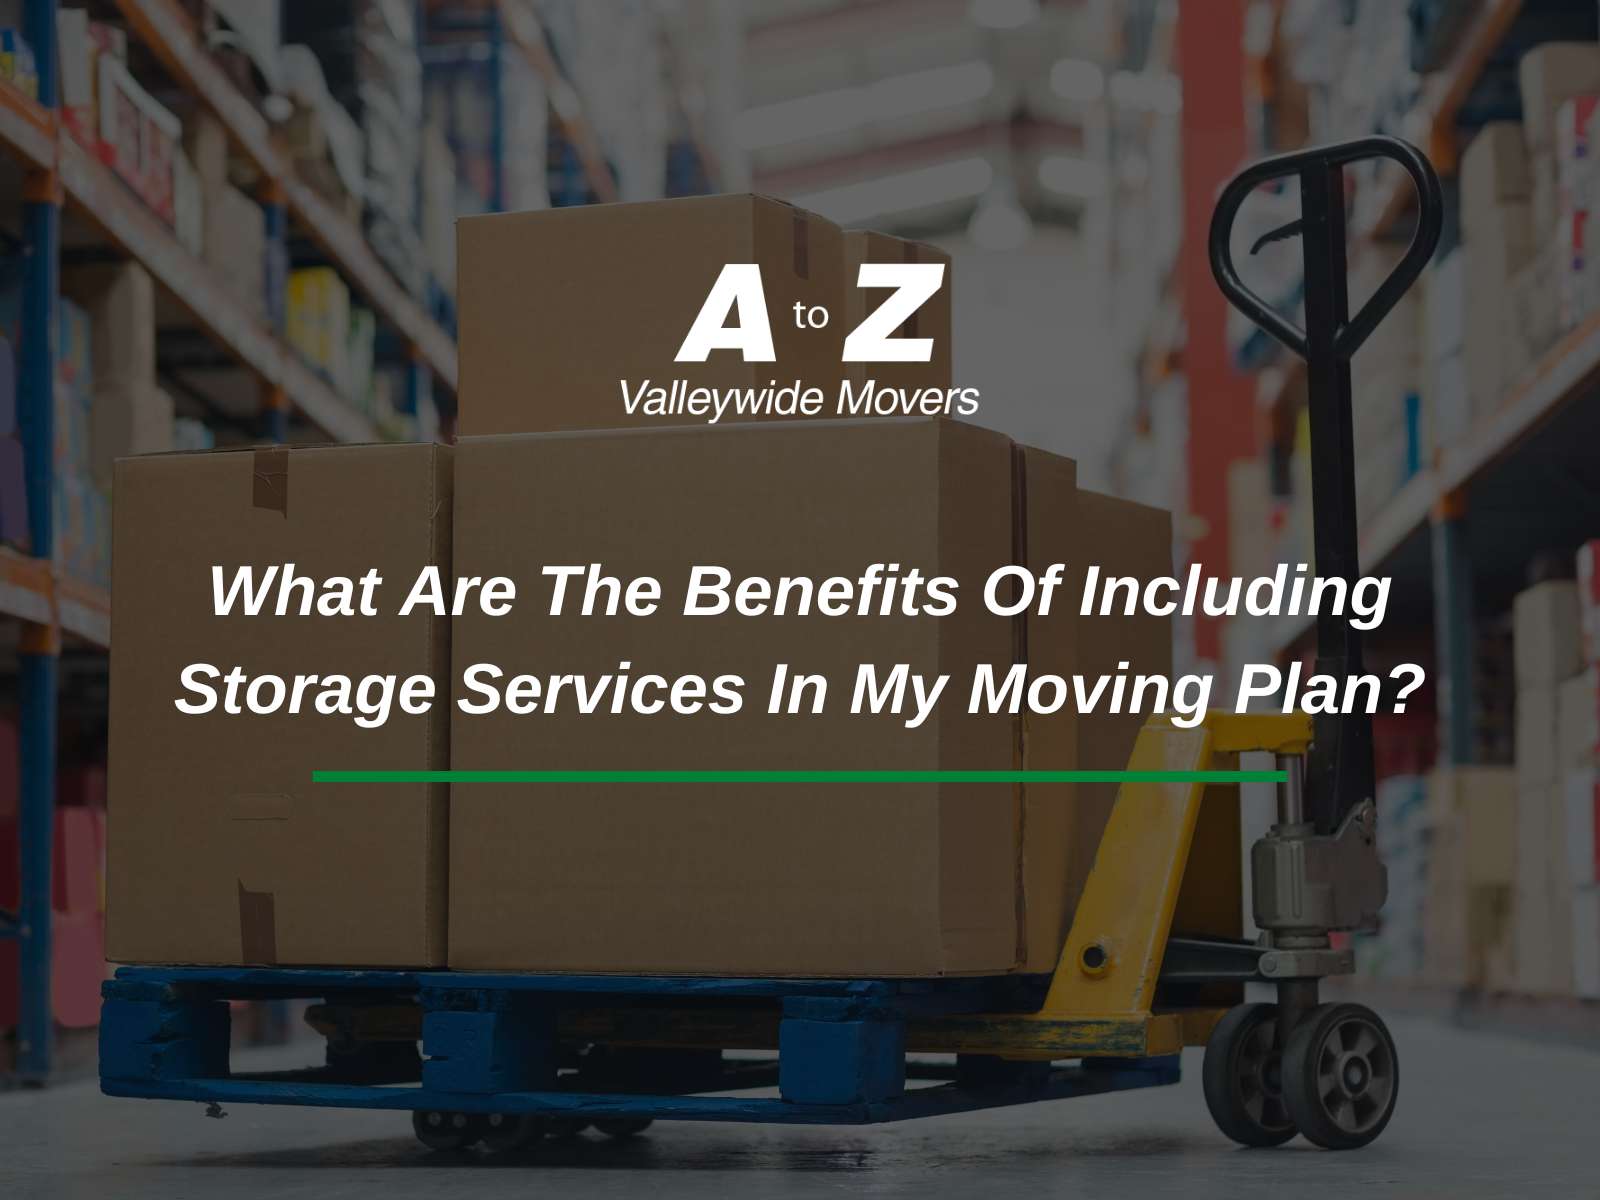 What Are The Benefits Of Including Storage Services In My Moving Plan